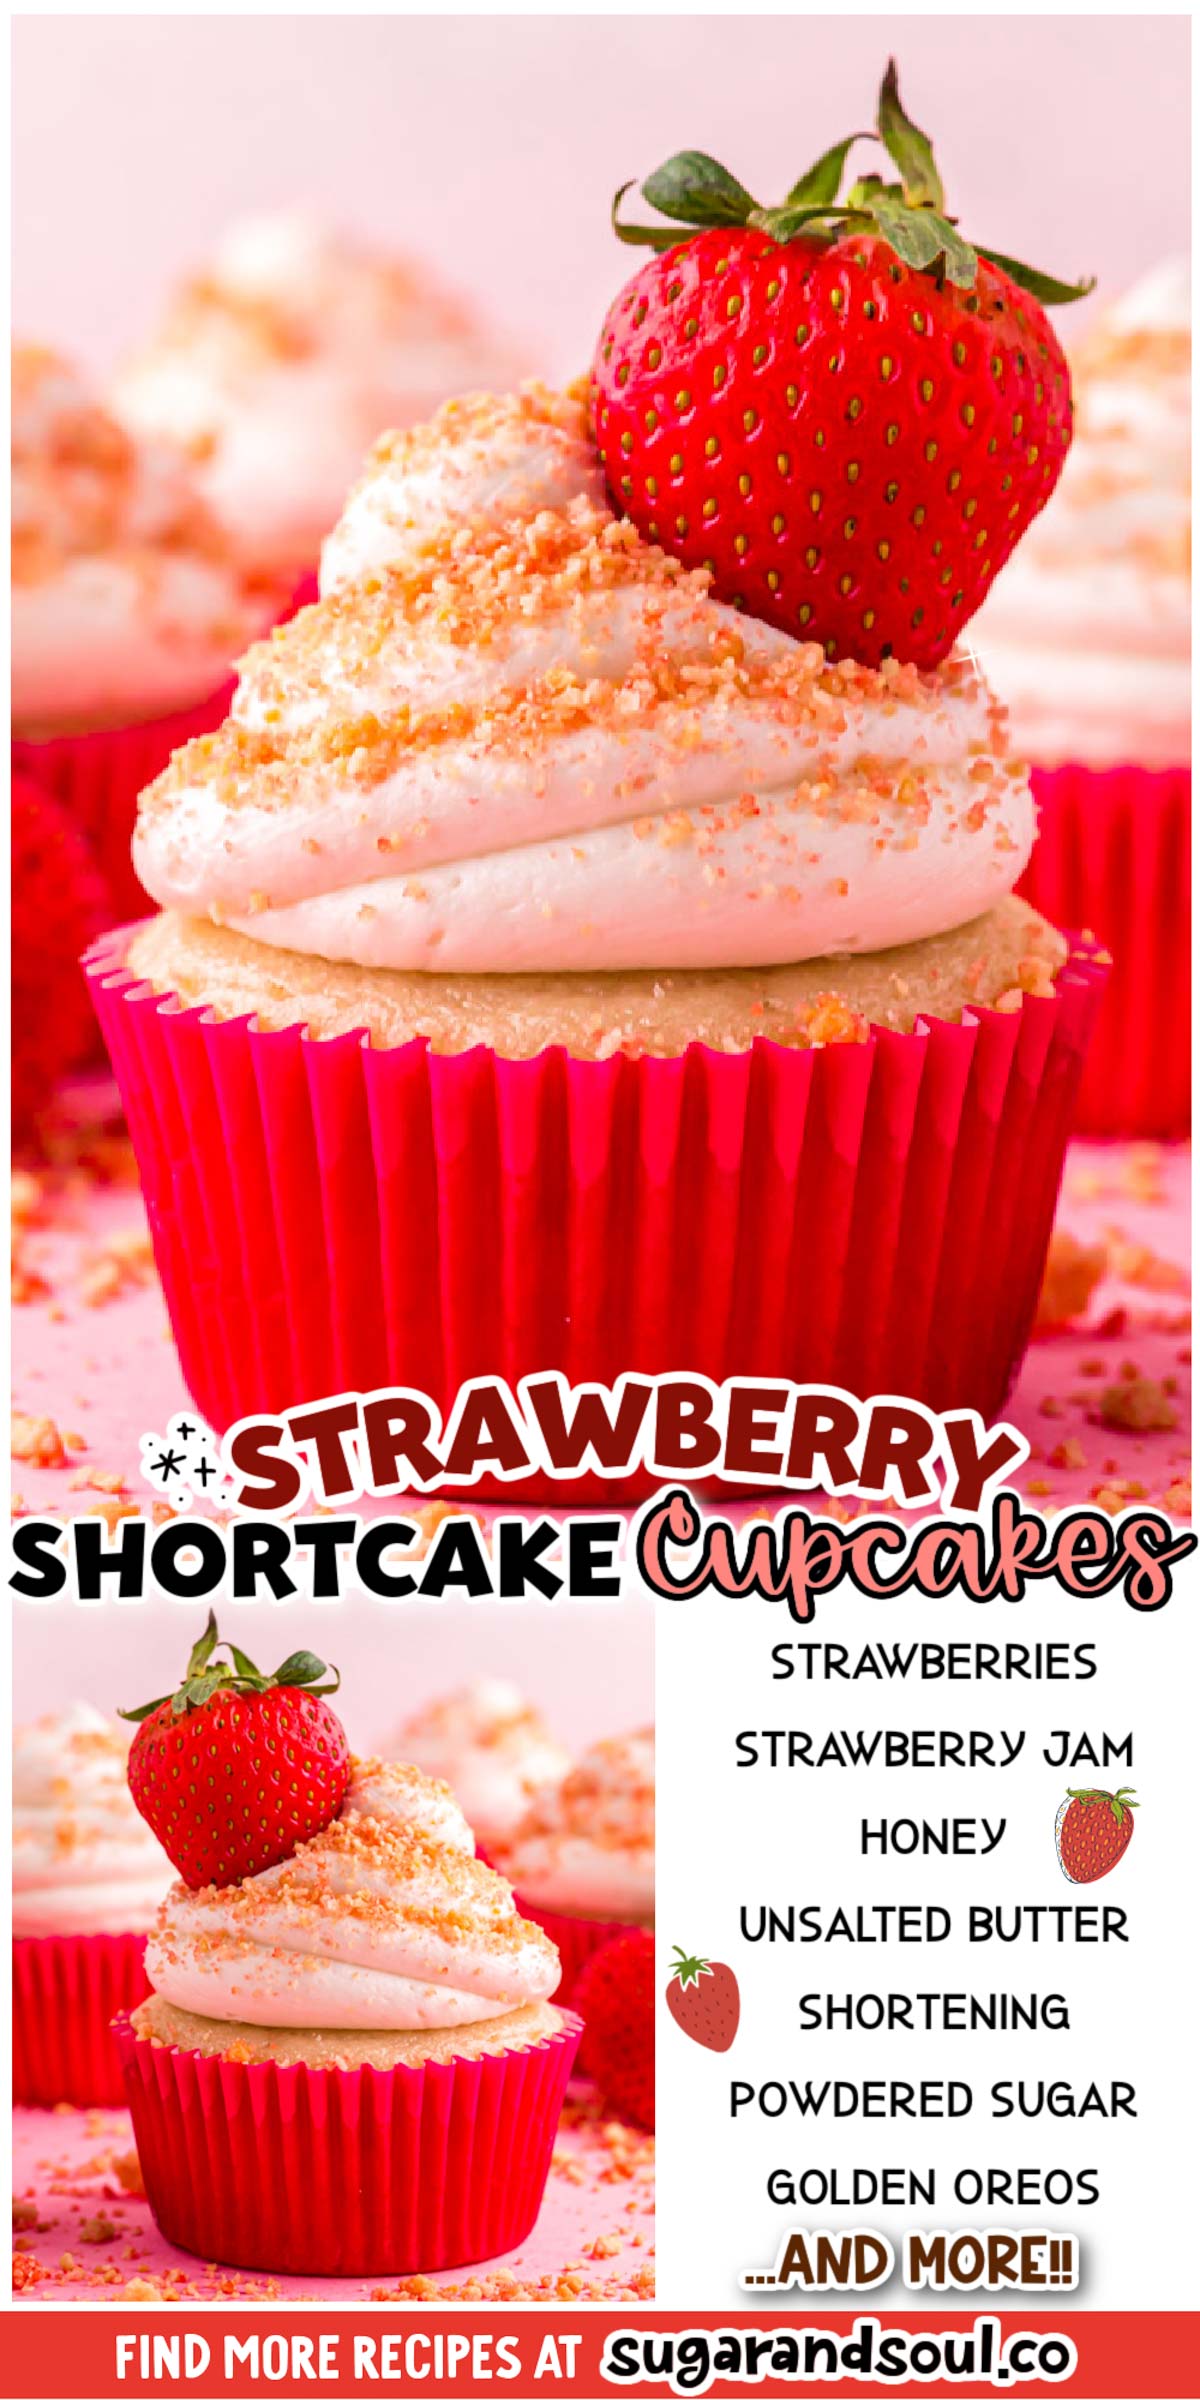 These Strawberry Shortcake Cupcakes have a 3-ingredient strawberry filling and are topped with homemade whipped buttercream frosting!  via @sugarandsoulco